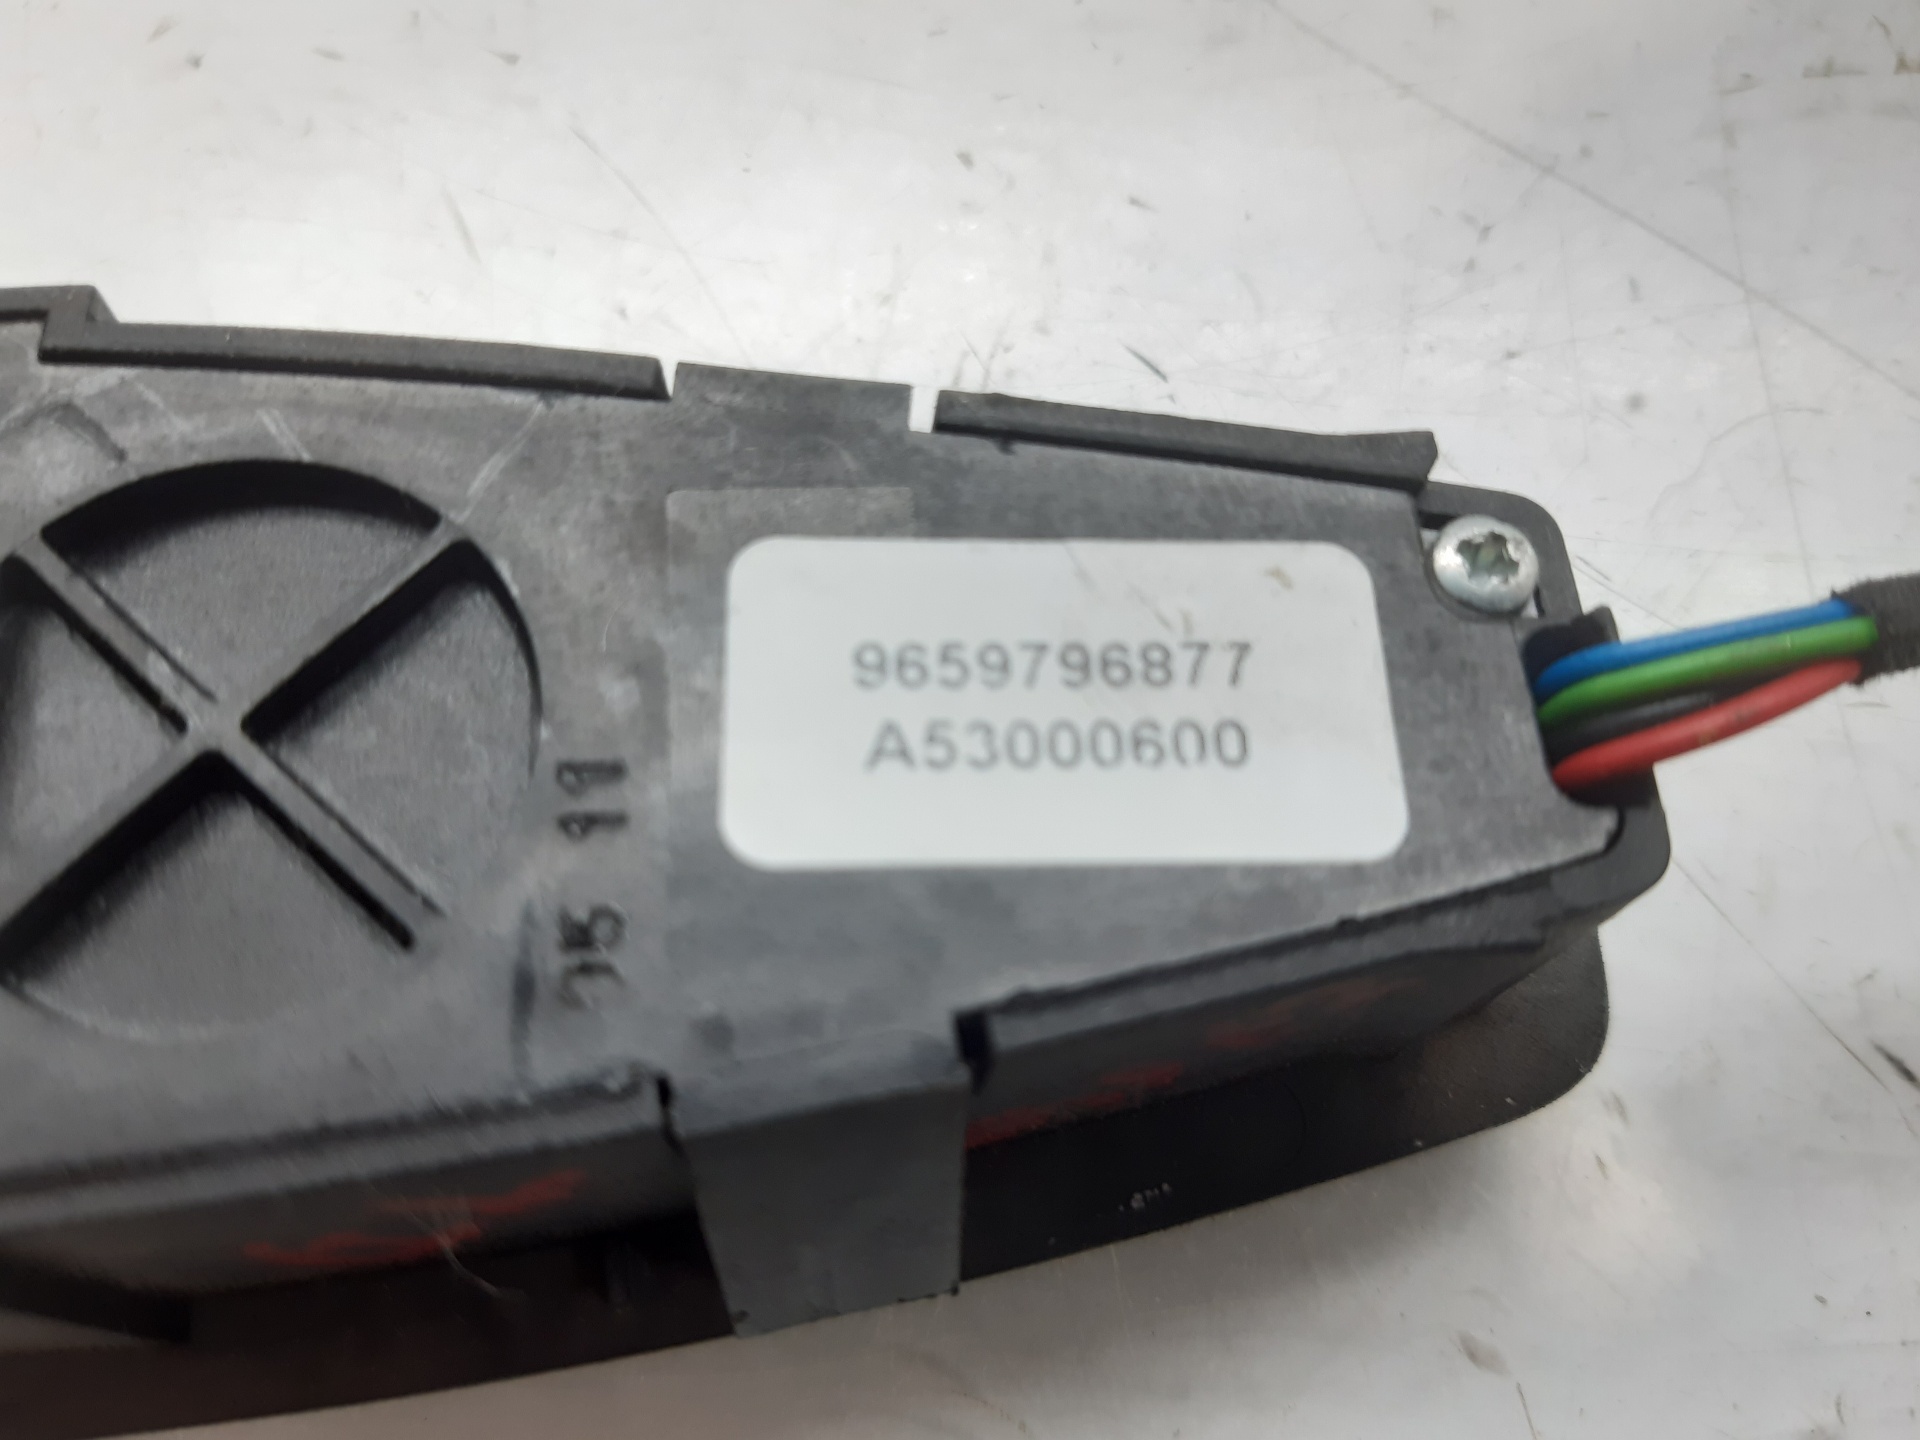 CITROËN C4 Picasso 1 generation (2006-2013) Switches 9659796877 22421901